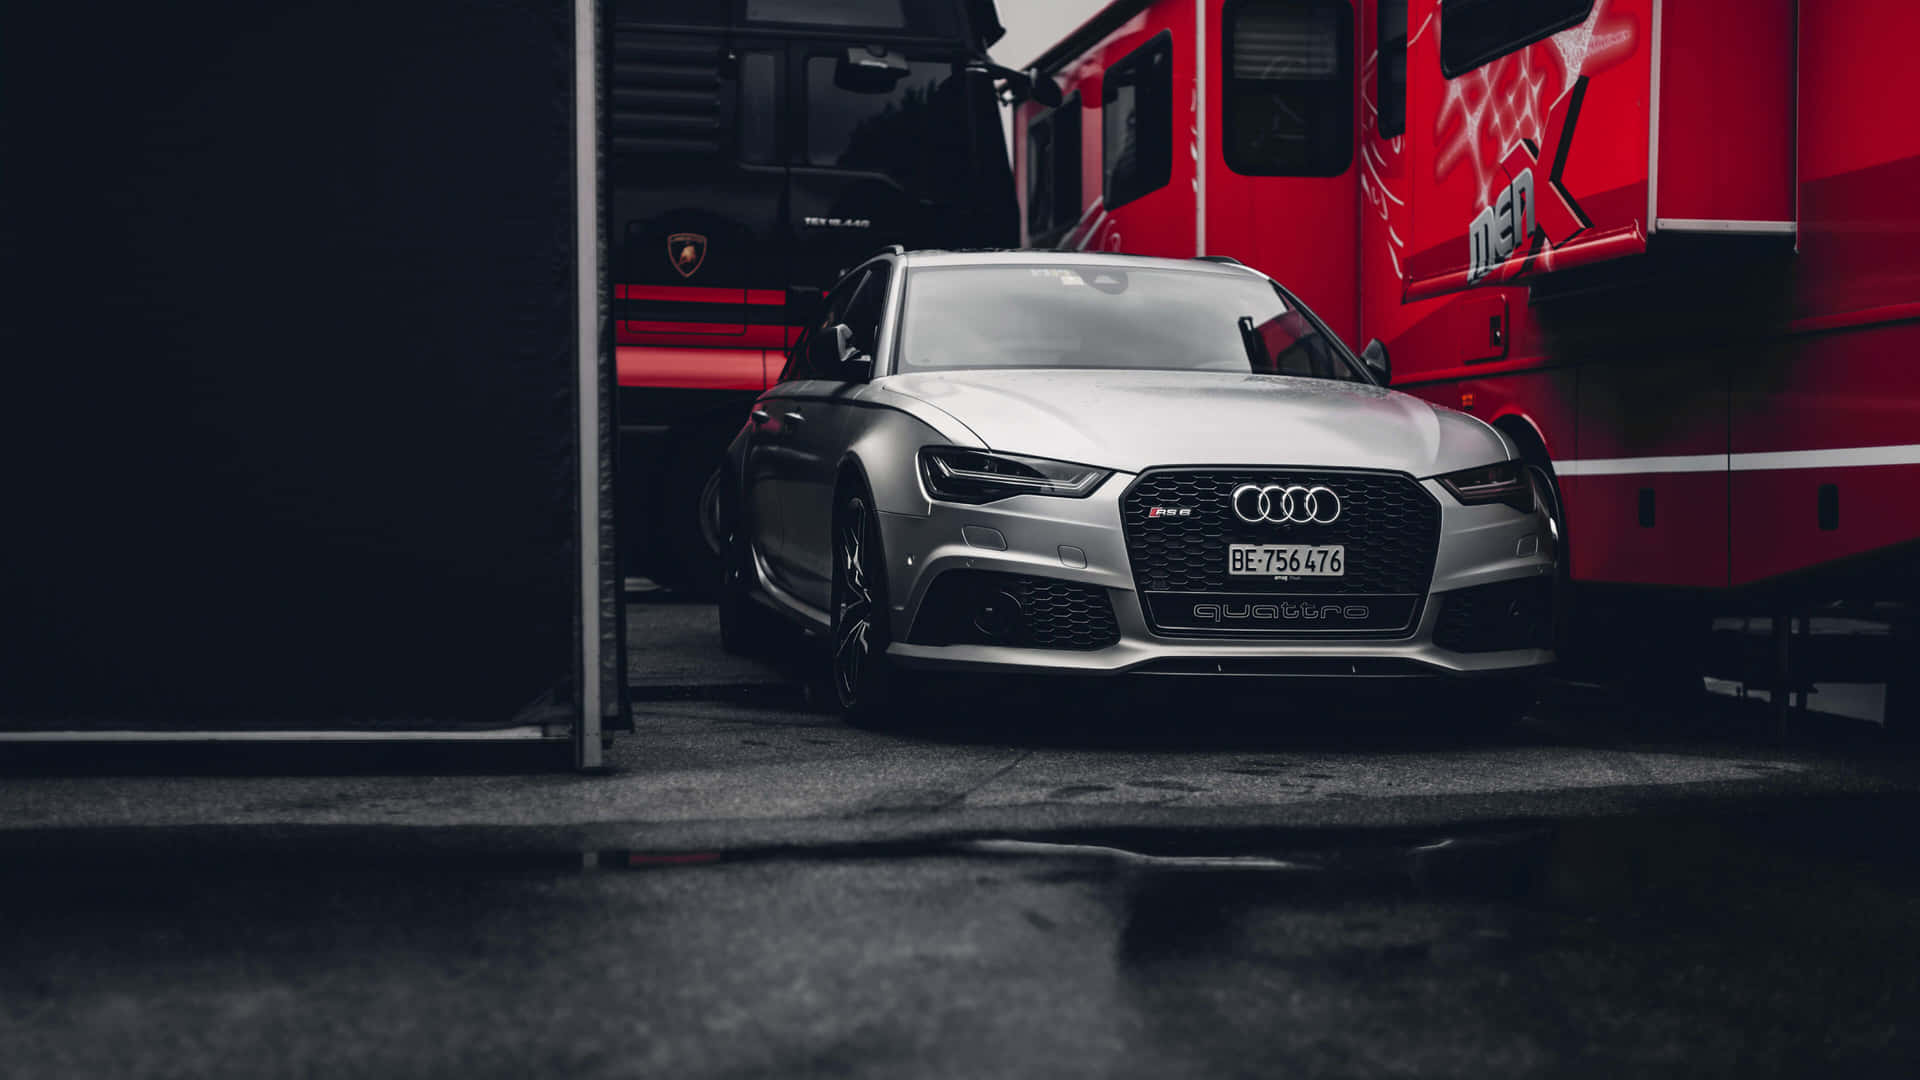 100+] Audi A6 Wallpapers